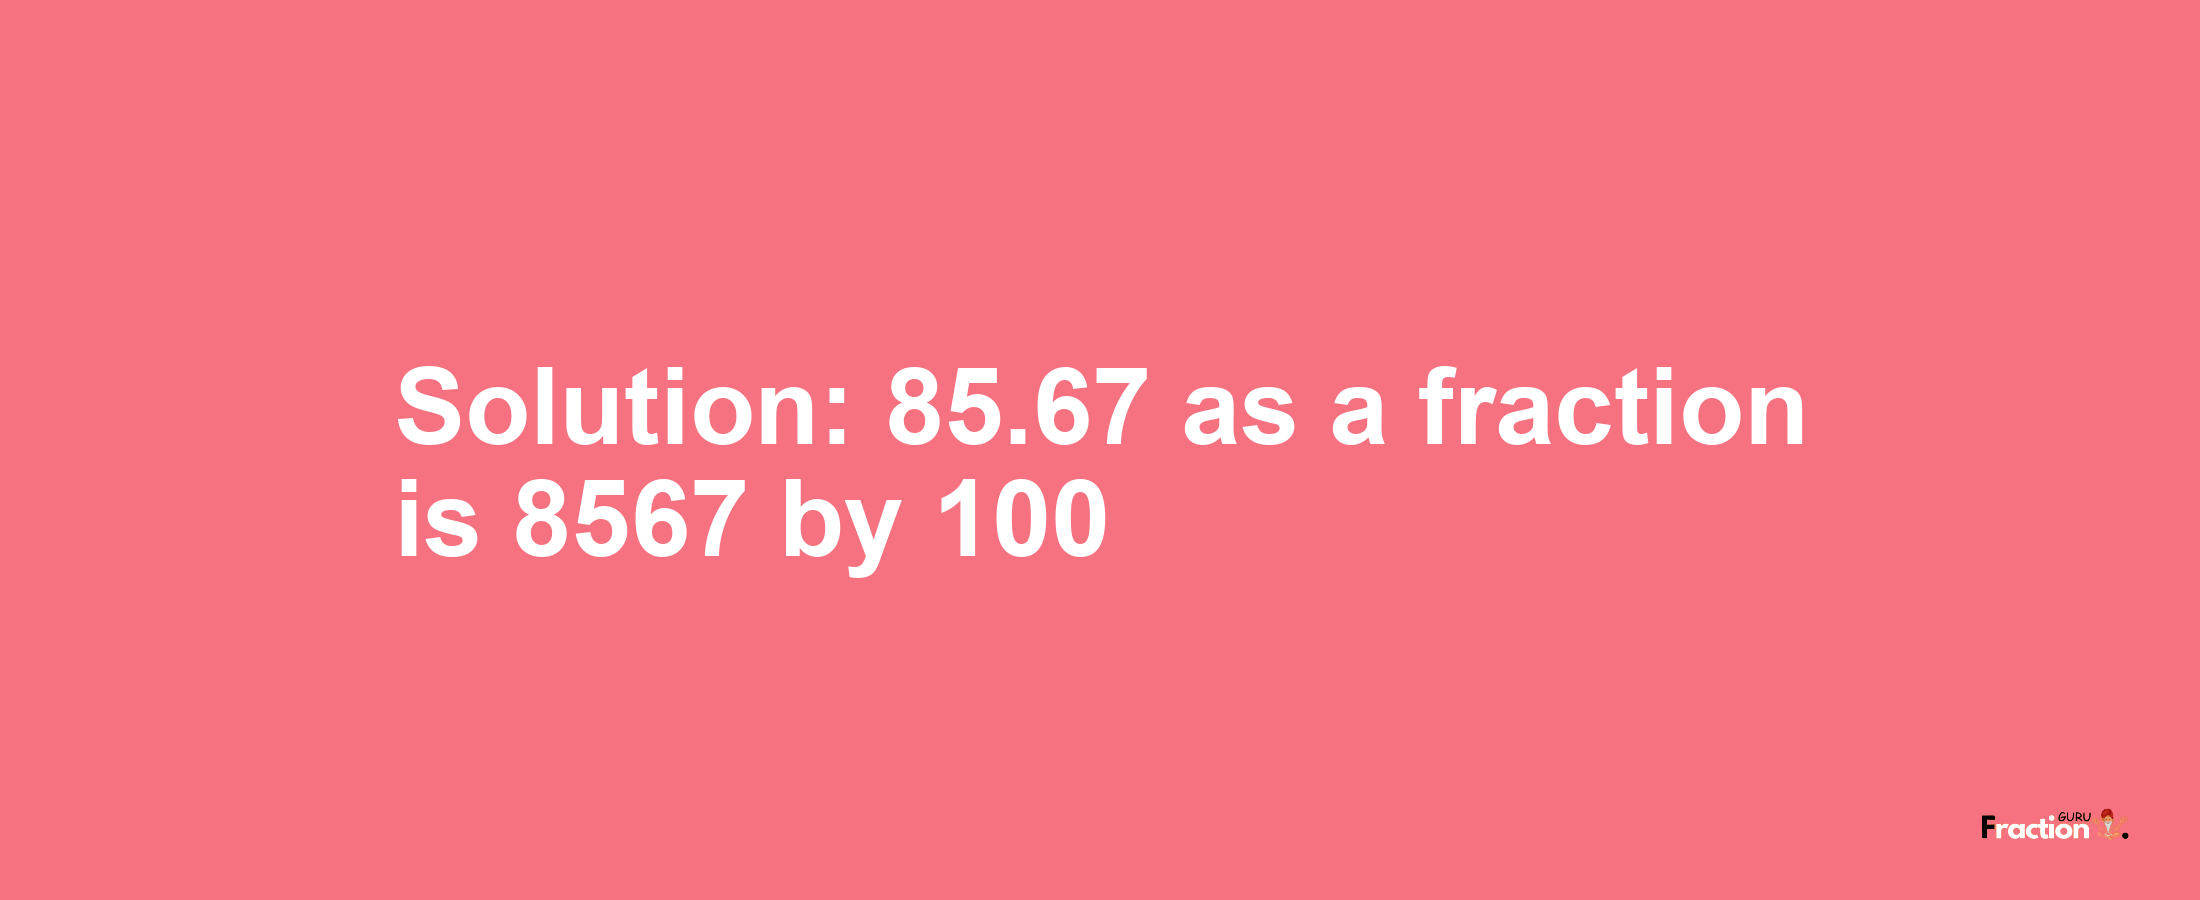 Solution:85.67 as a fraction is 8567/100